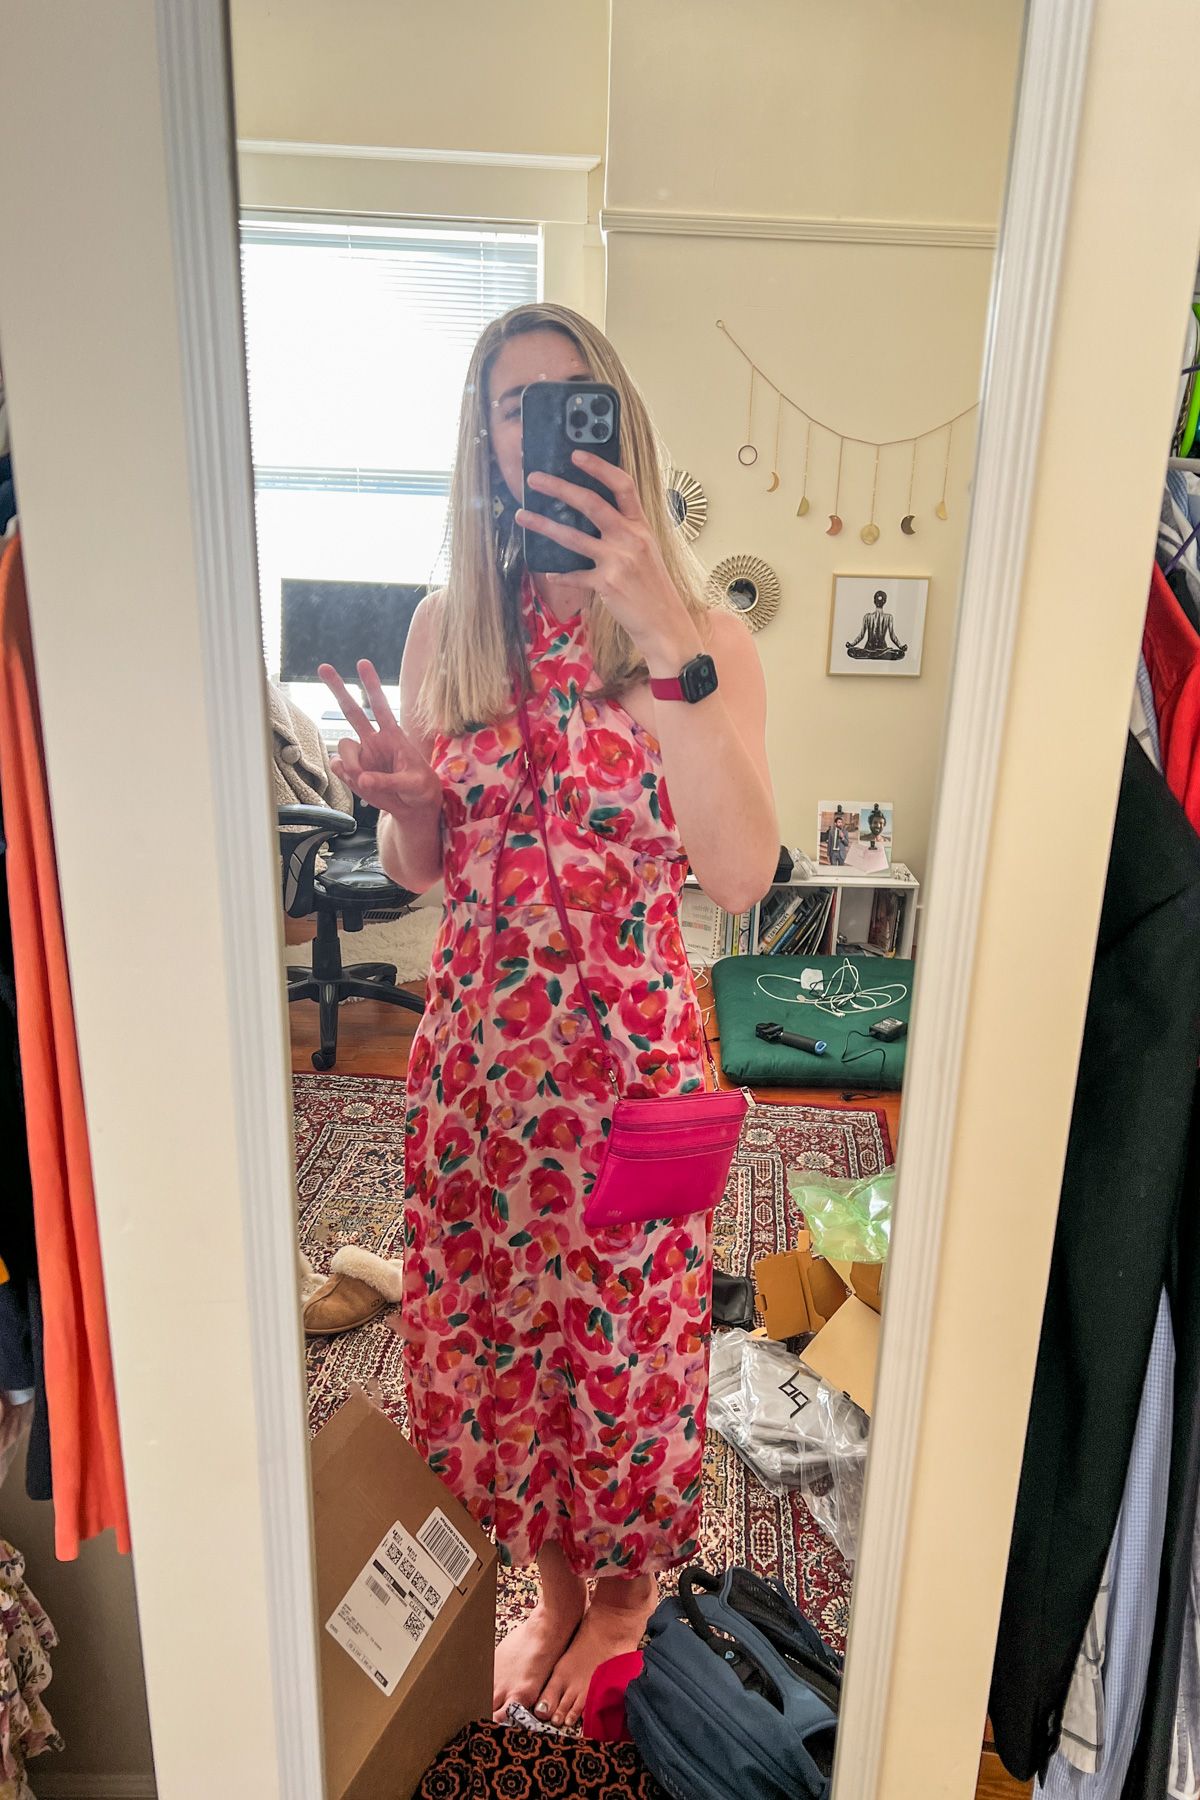 A woman wearing a silky, pink floral dress takes a mirror selfie with her bedroom visible in the background.